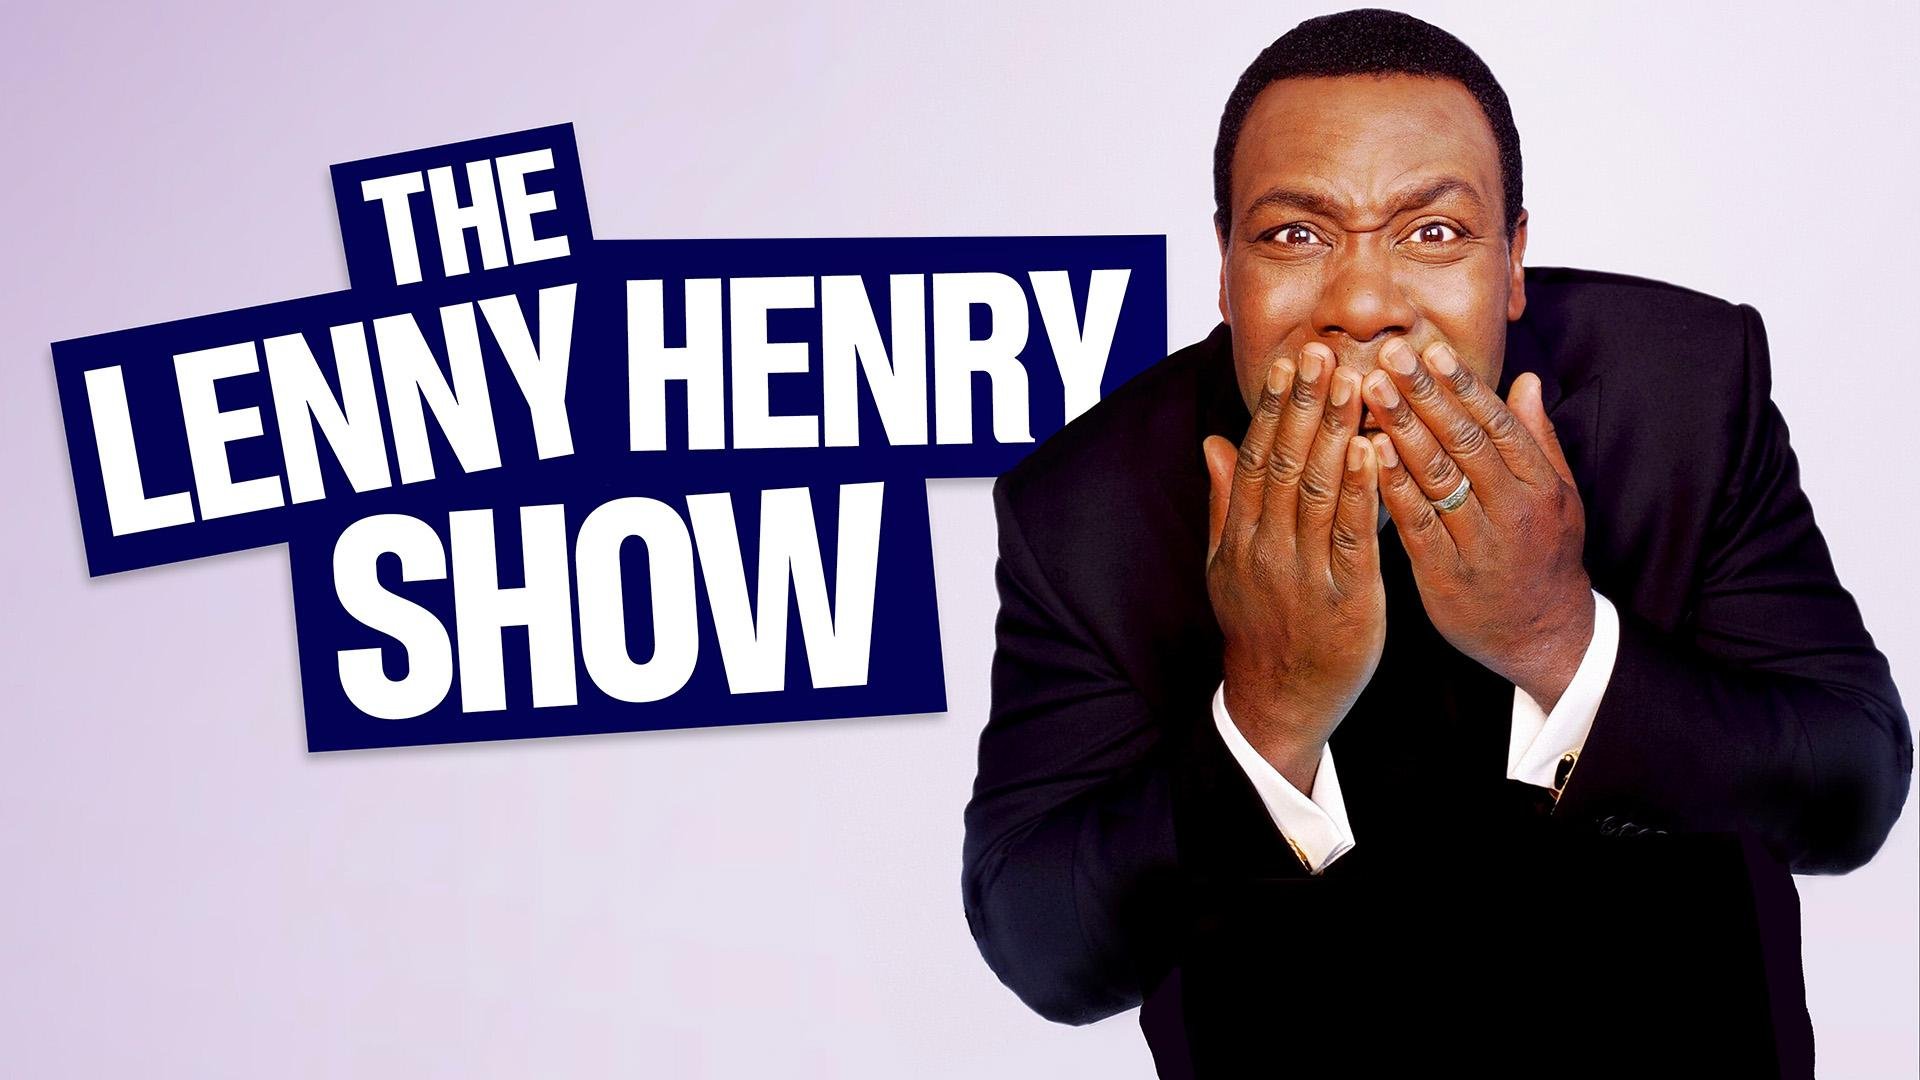 Watch The Lenny Henry Show Online - Stream Full Episodes